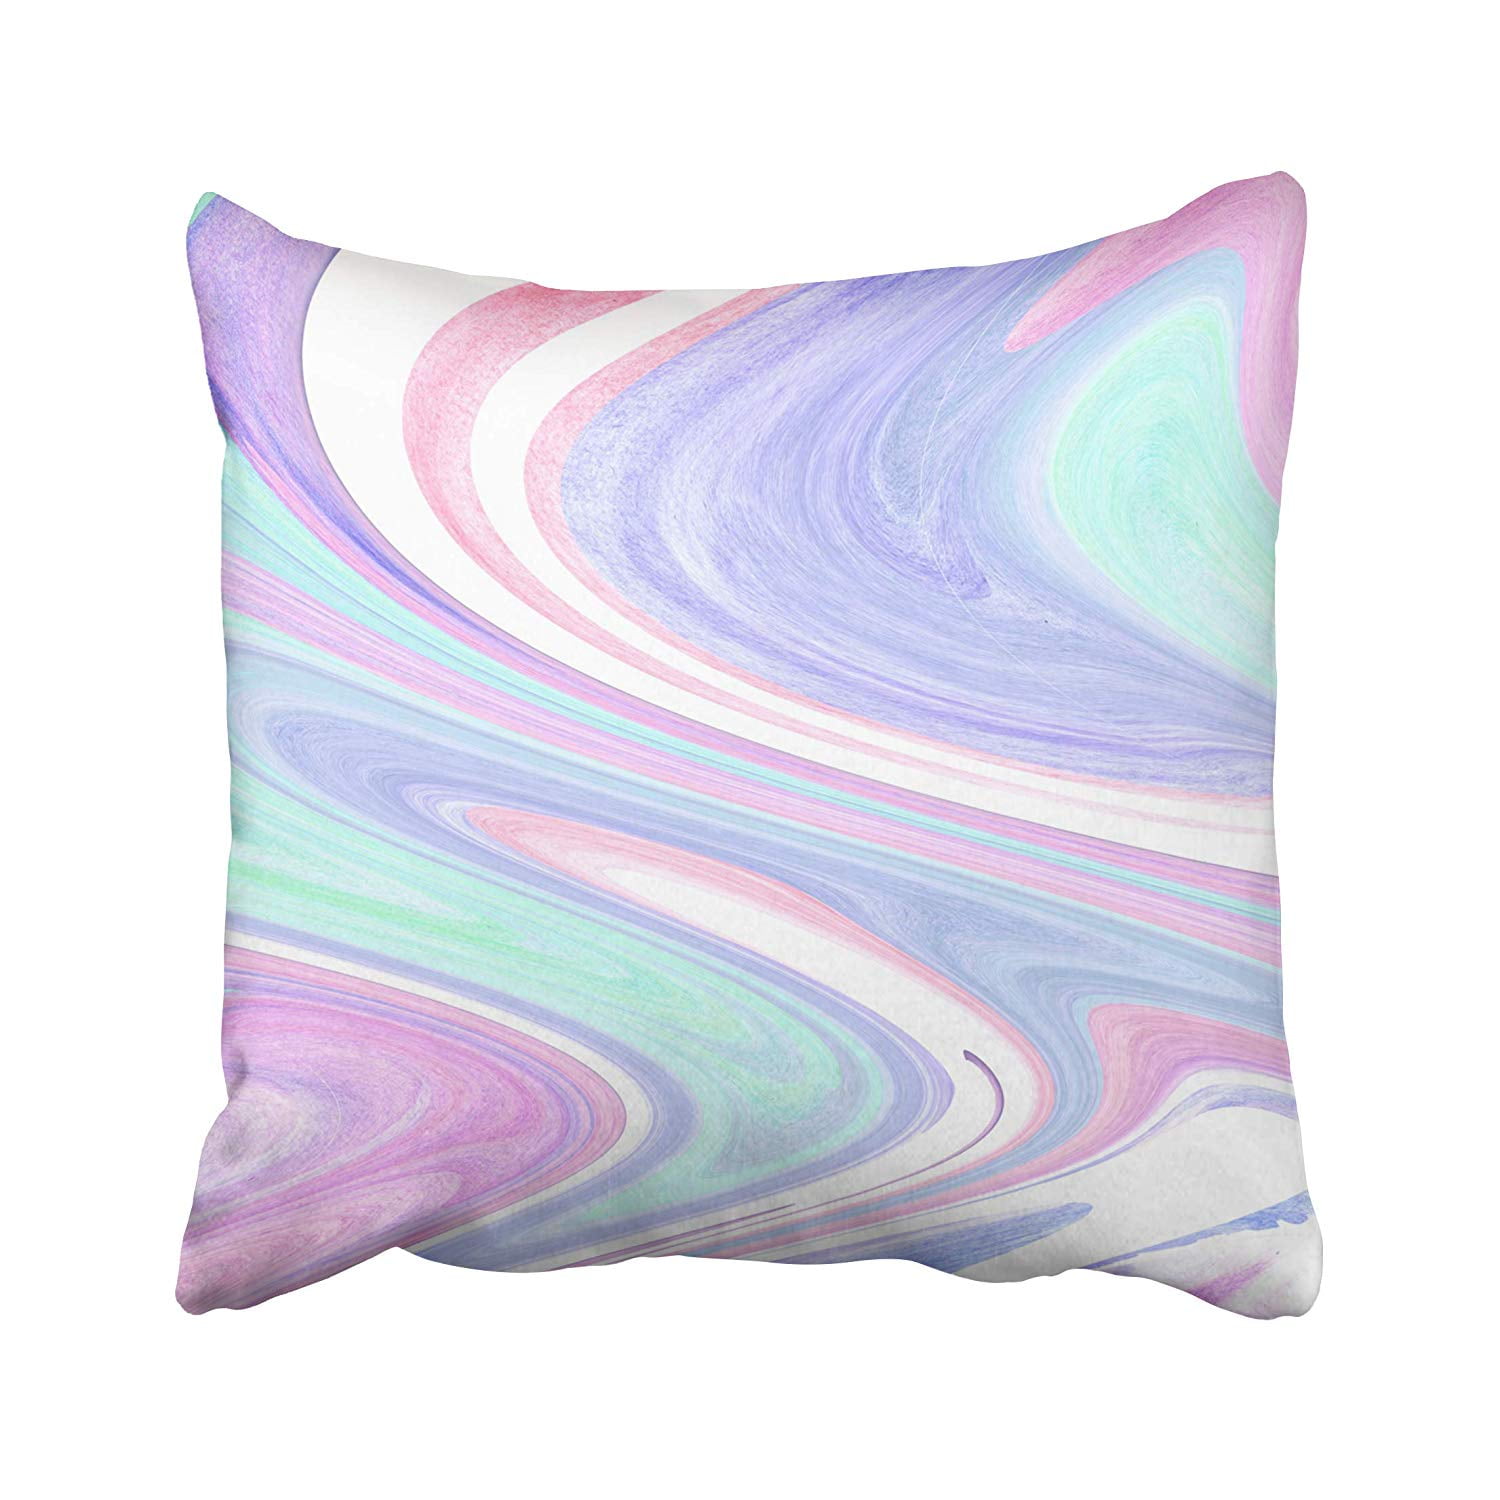 pink and purple pillows